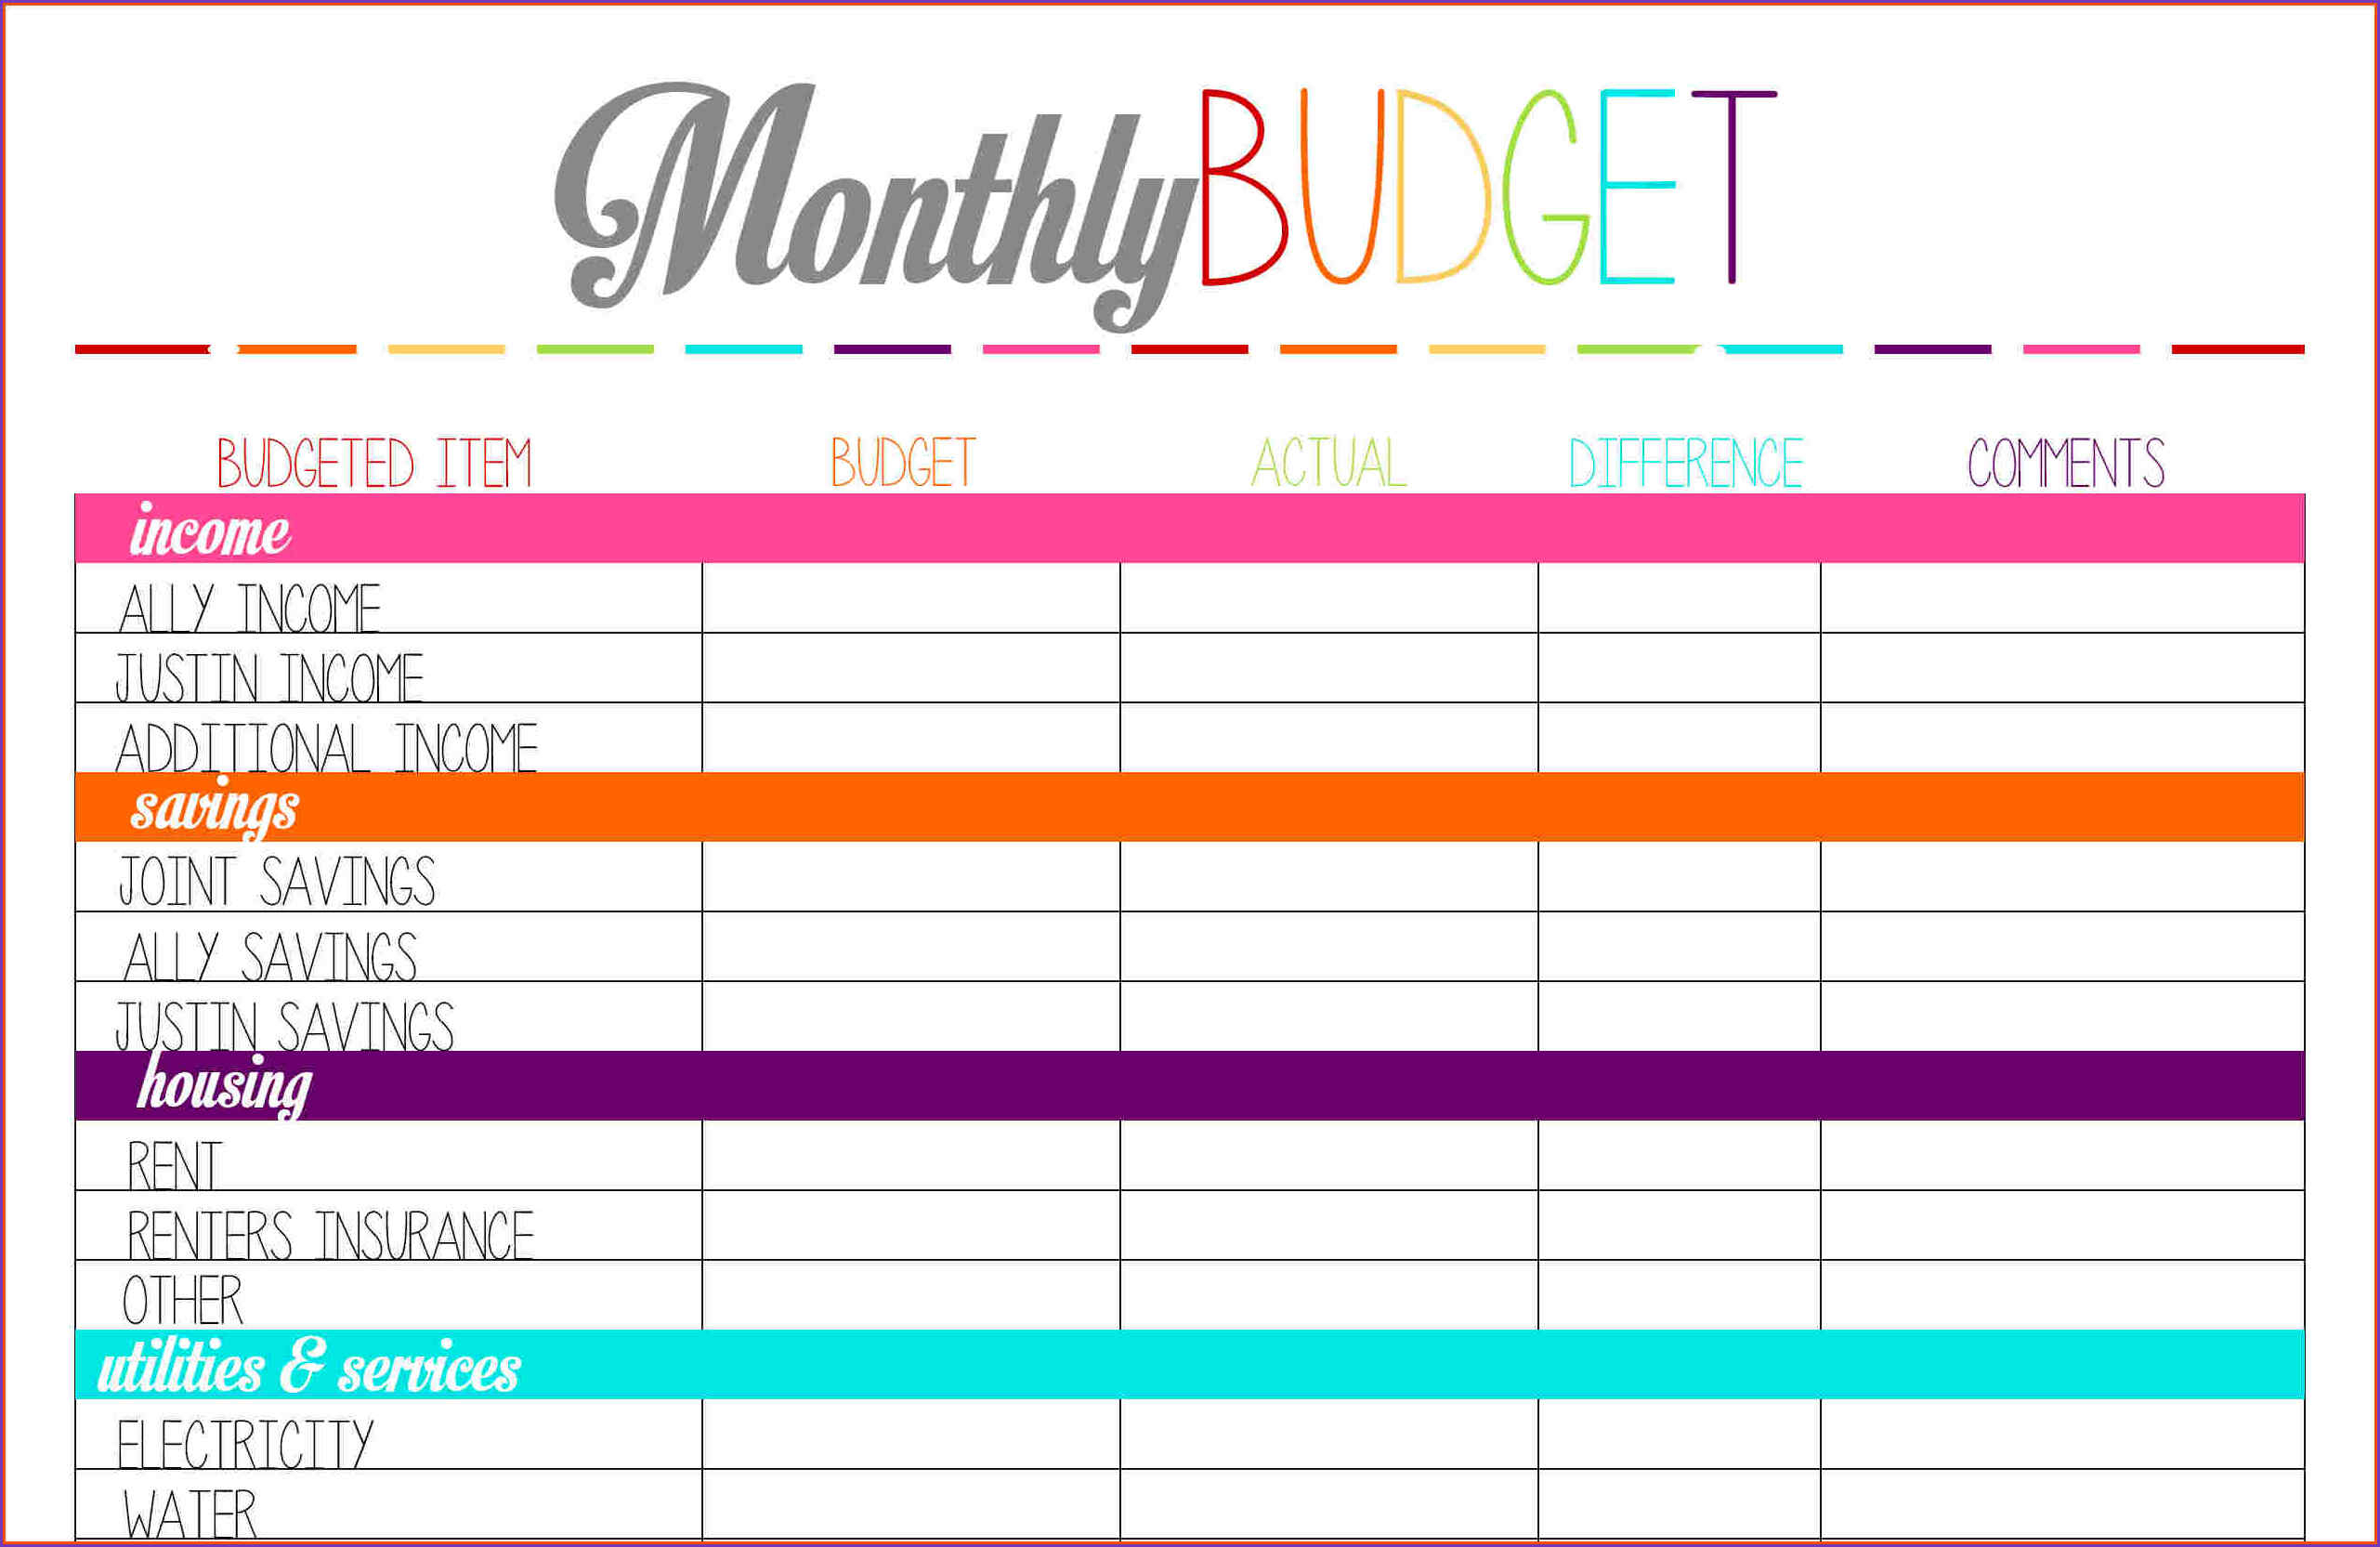 Excel Spreadsheet Templates Uk throughout Monthly Budget Worksheet Template Images Design Home Excel